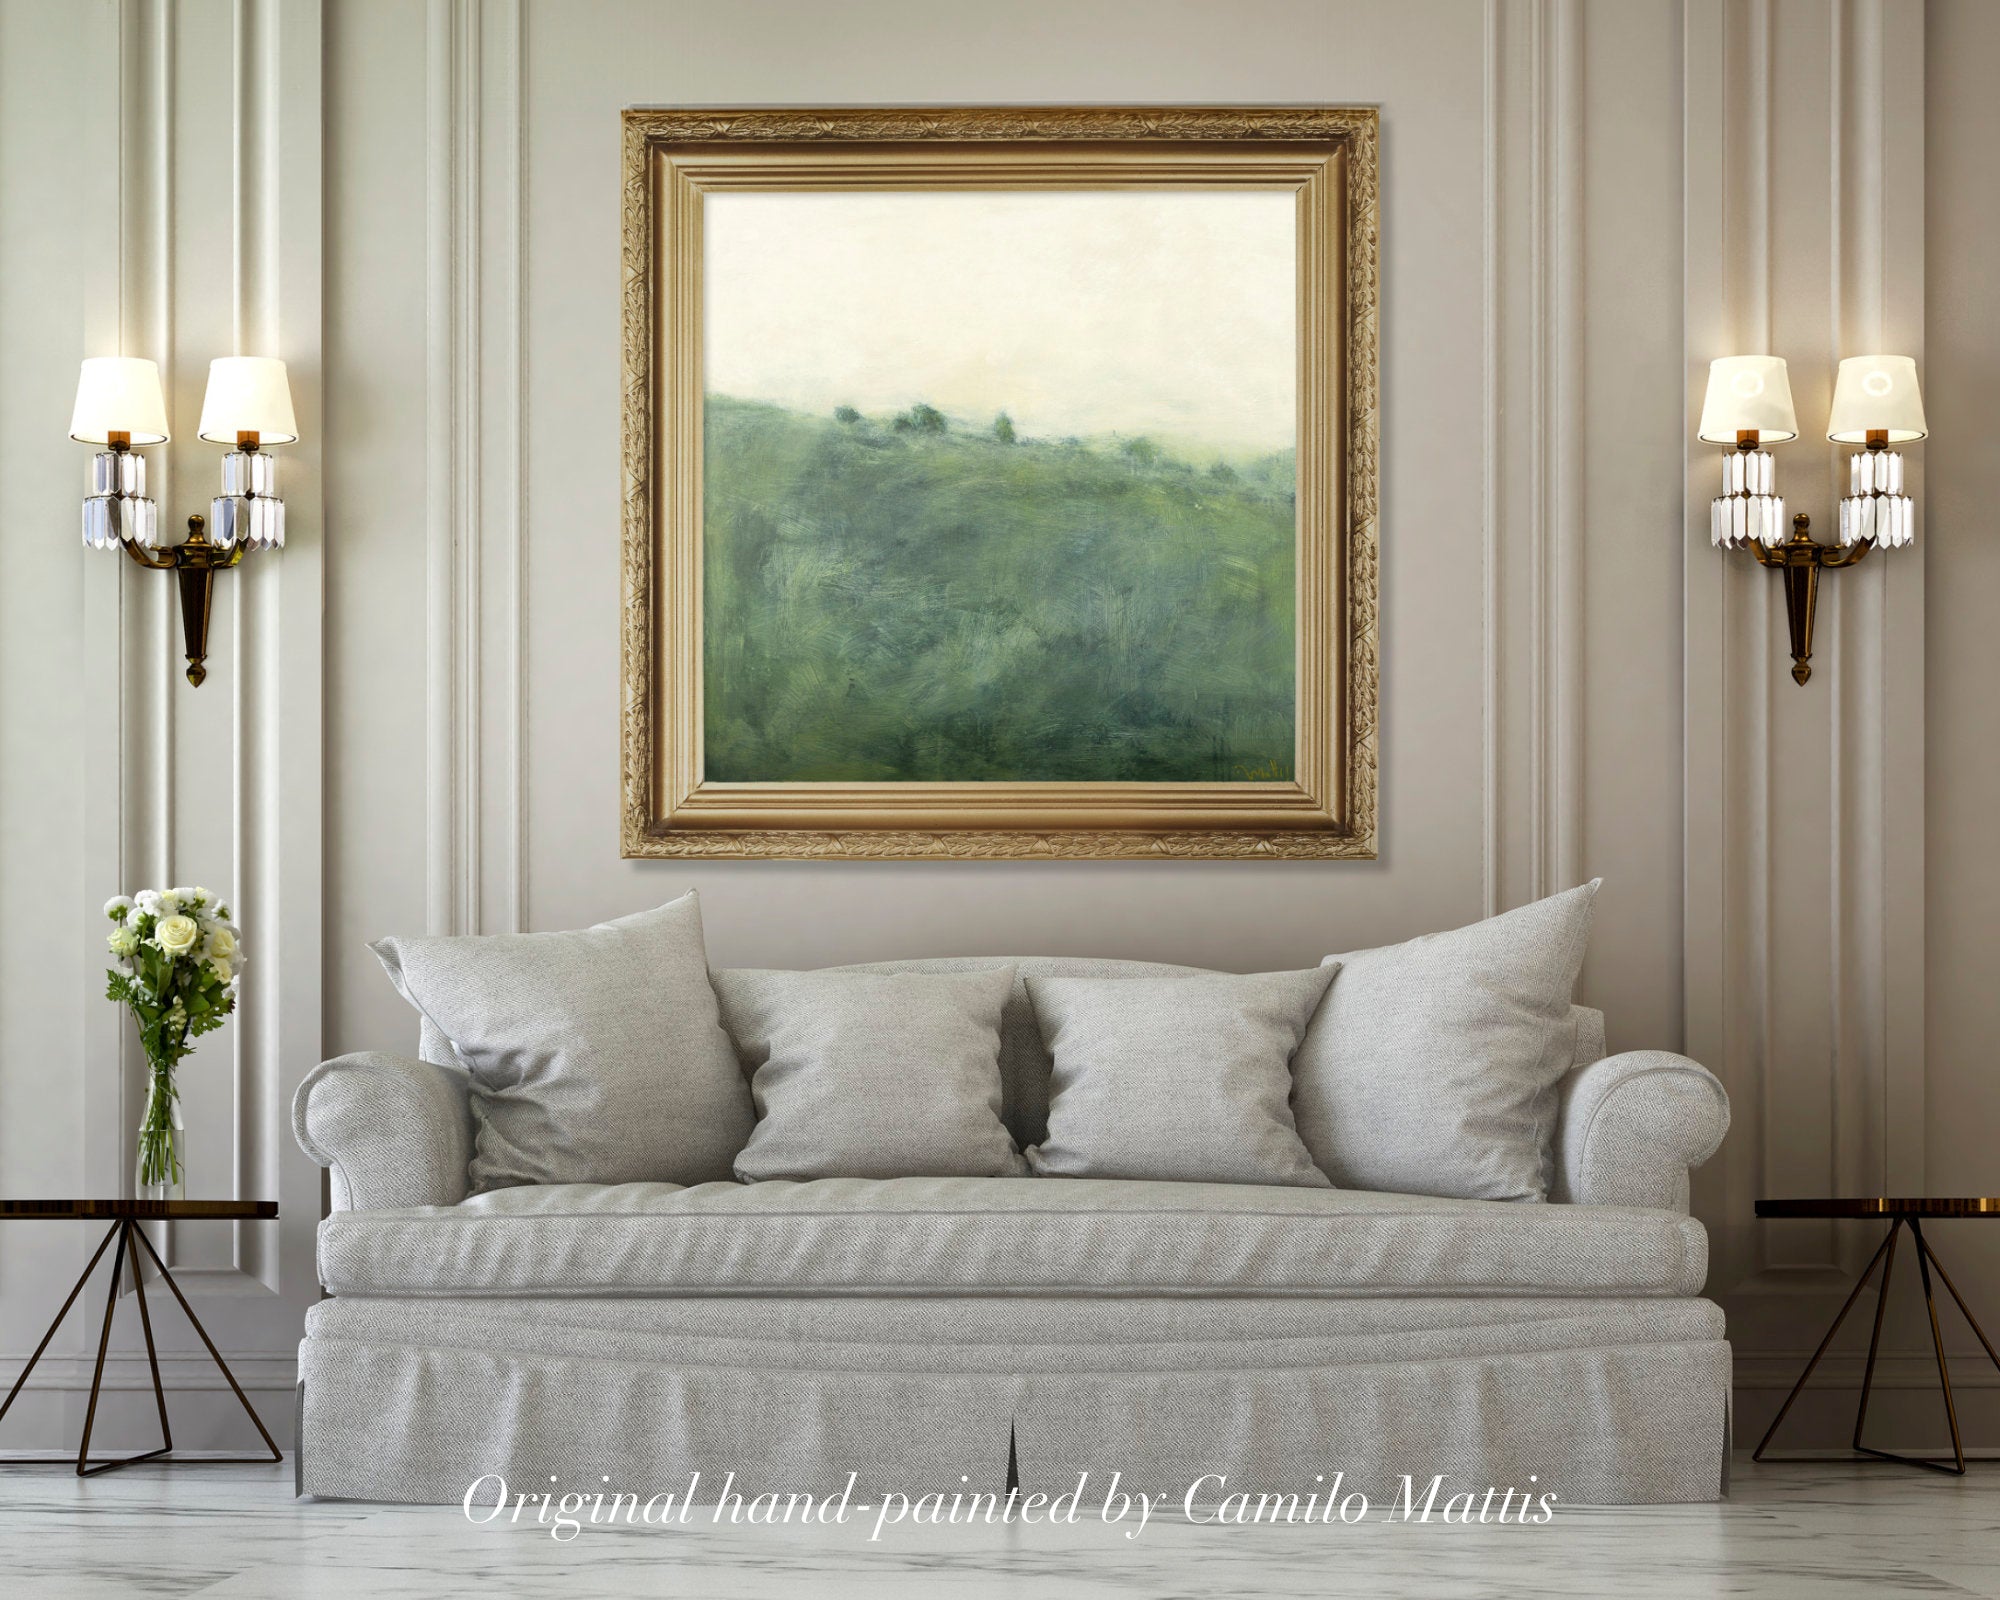 Landscape painting original on canvas, Country Scenery wall art with muted colors by Camilo Mattis